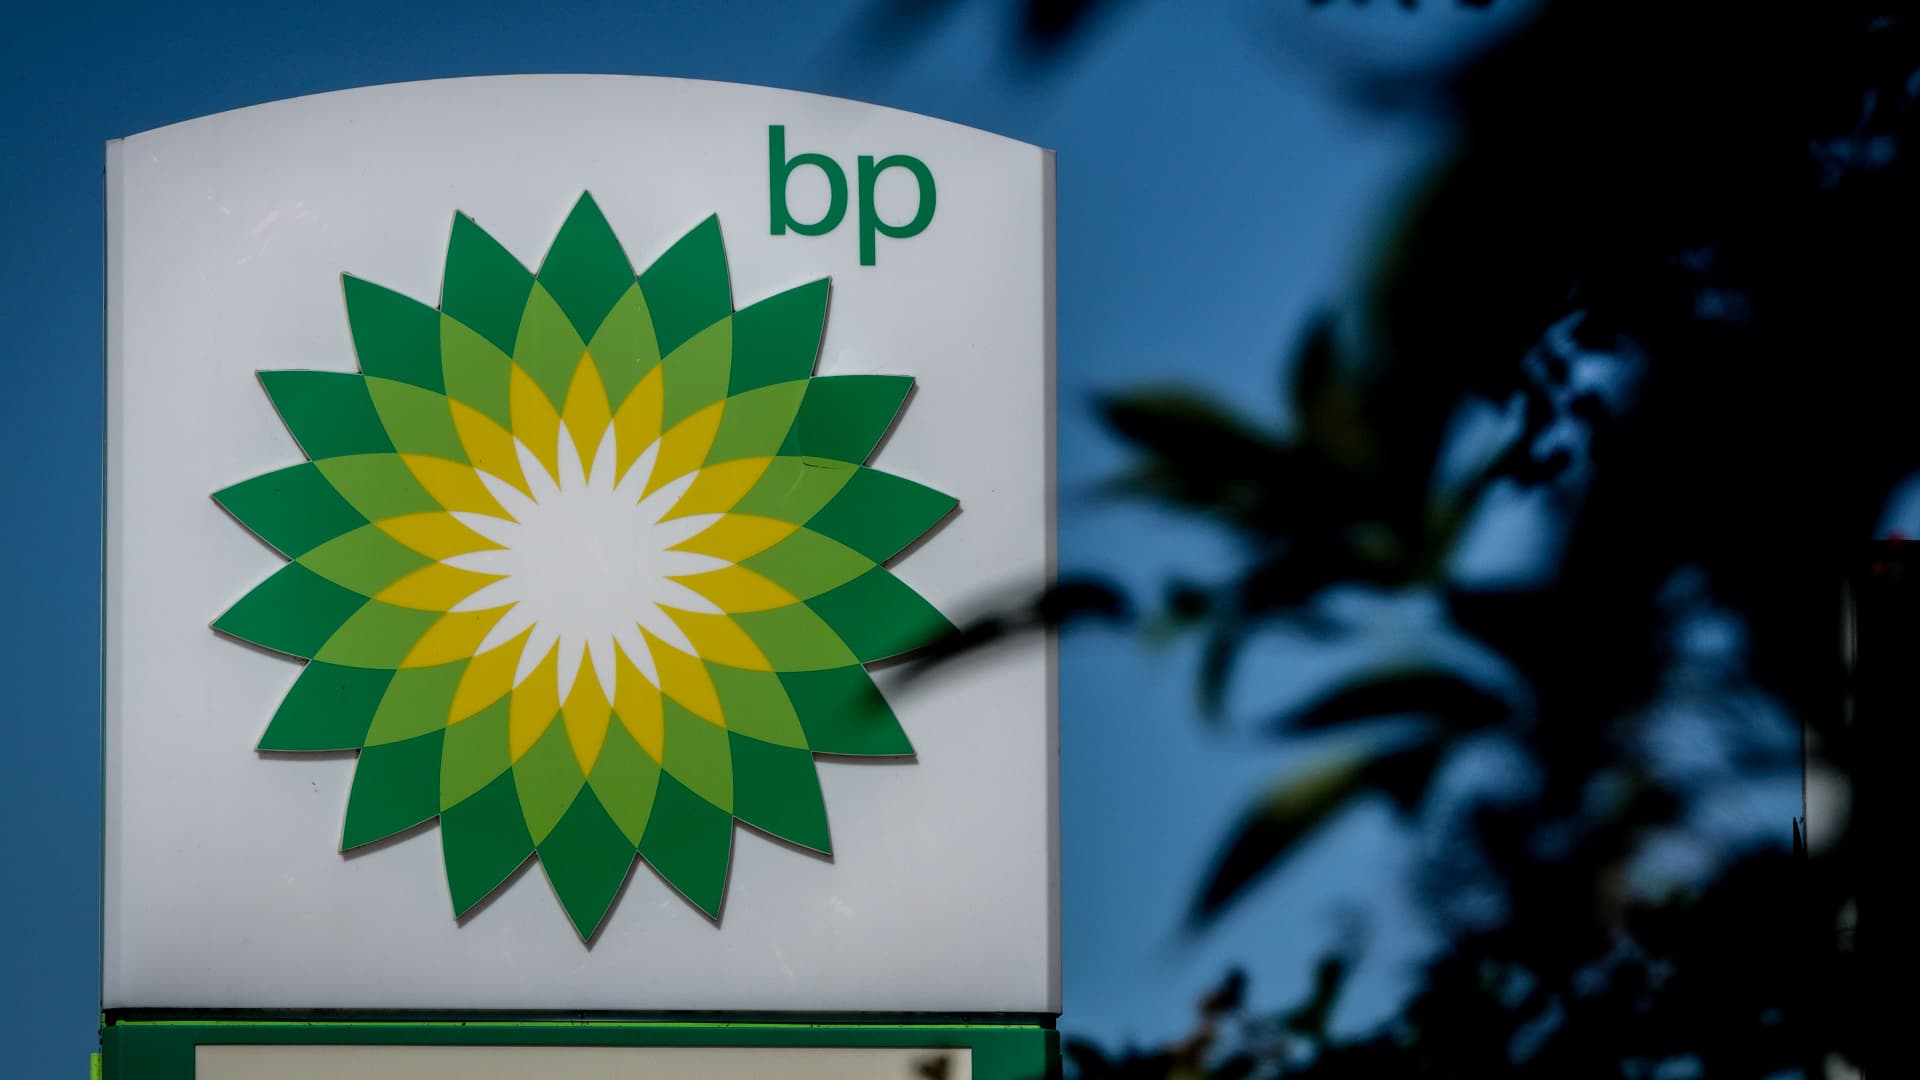 BP shares rise 6% after British oil giant announces plans to boost shareholder returns